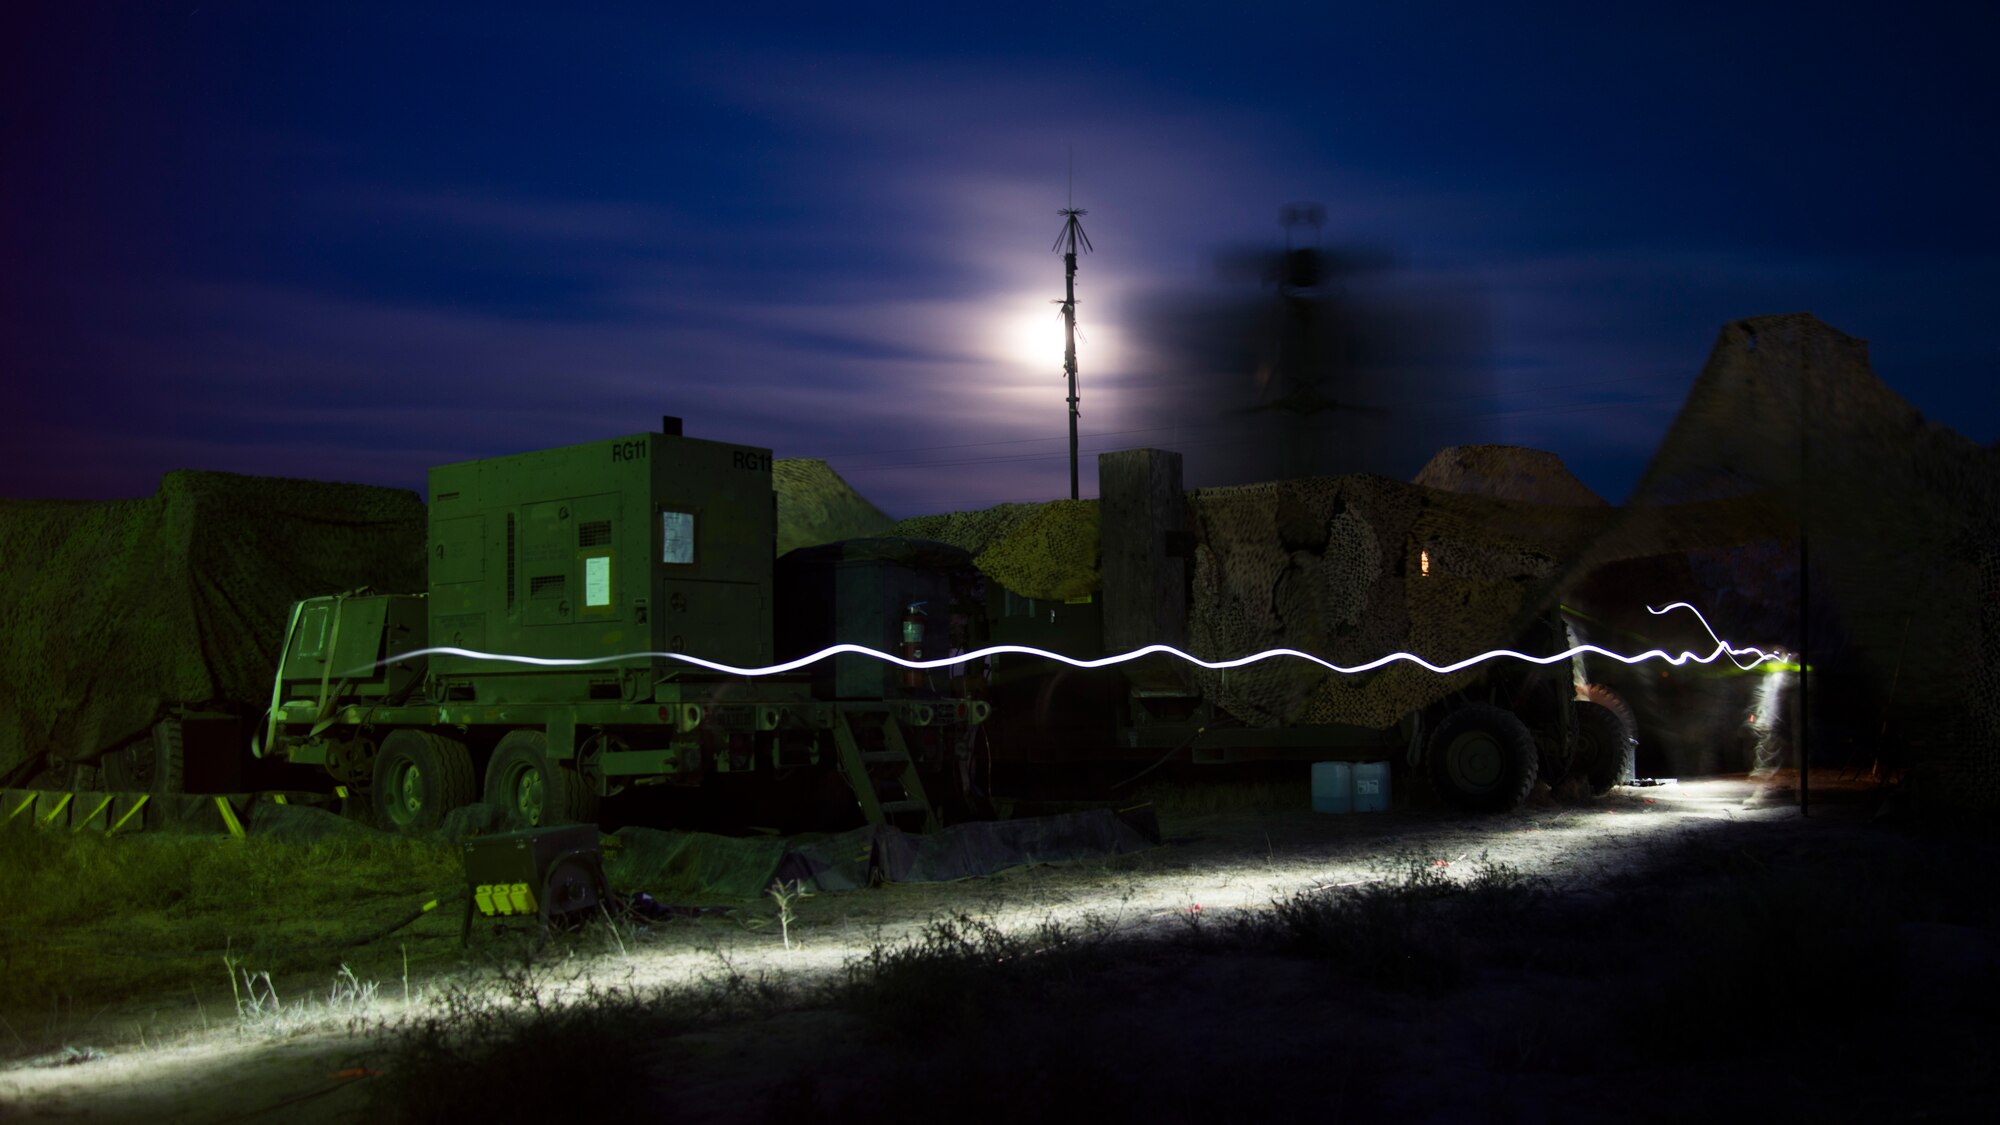 A U.S. Air Force Airman from the 726th Air Control Squadron walks by a spinning TPS-75 radar sytem with a flashlight in hand during Hardrock Exercise 19-2, July 15, 2019, at Mountain Home Air Base, Idaho. The exercise was in a simulated deployed location where the base was built from the ground up and took control of the airspace. (U.S. Air Force photo by Airman 1st Class Andrew Kobialka)